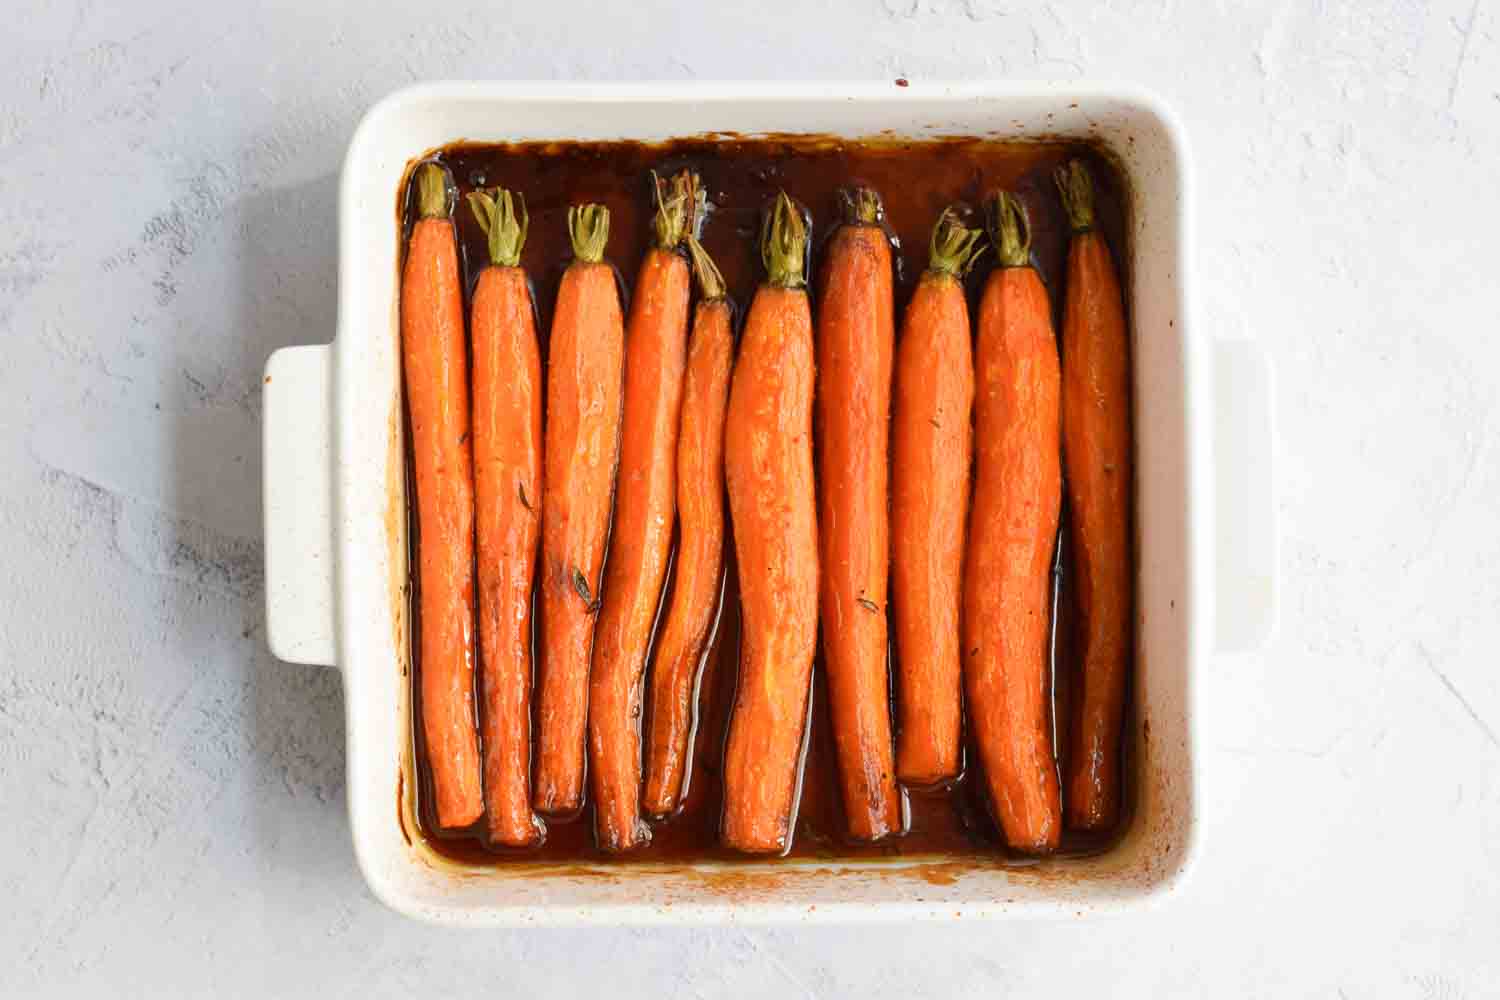 Low FODMAP glazed carrots photographed from above